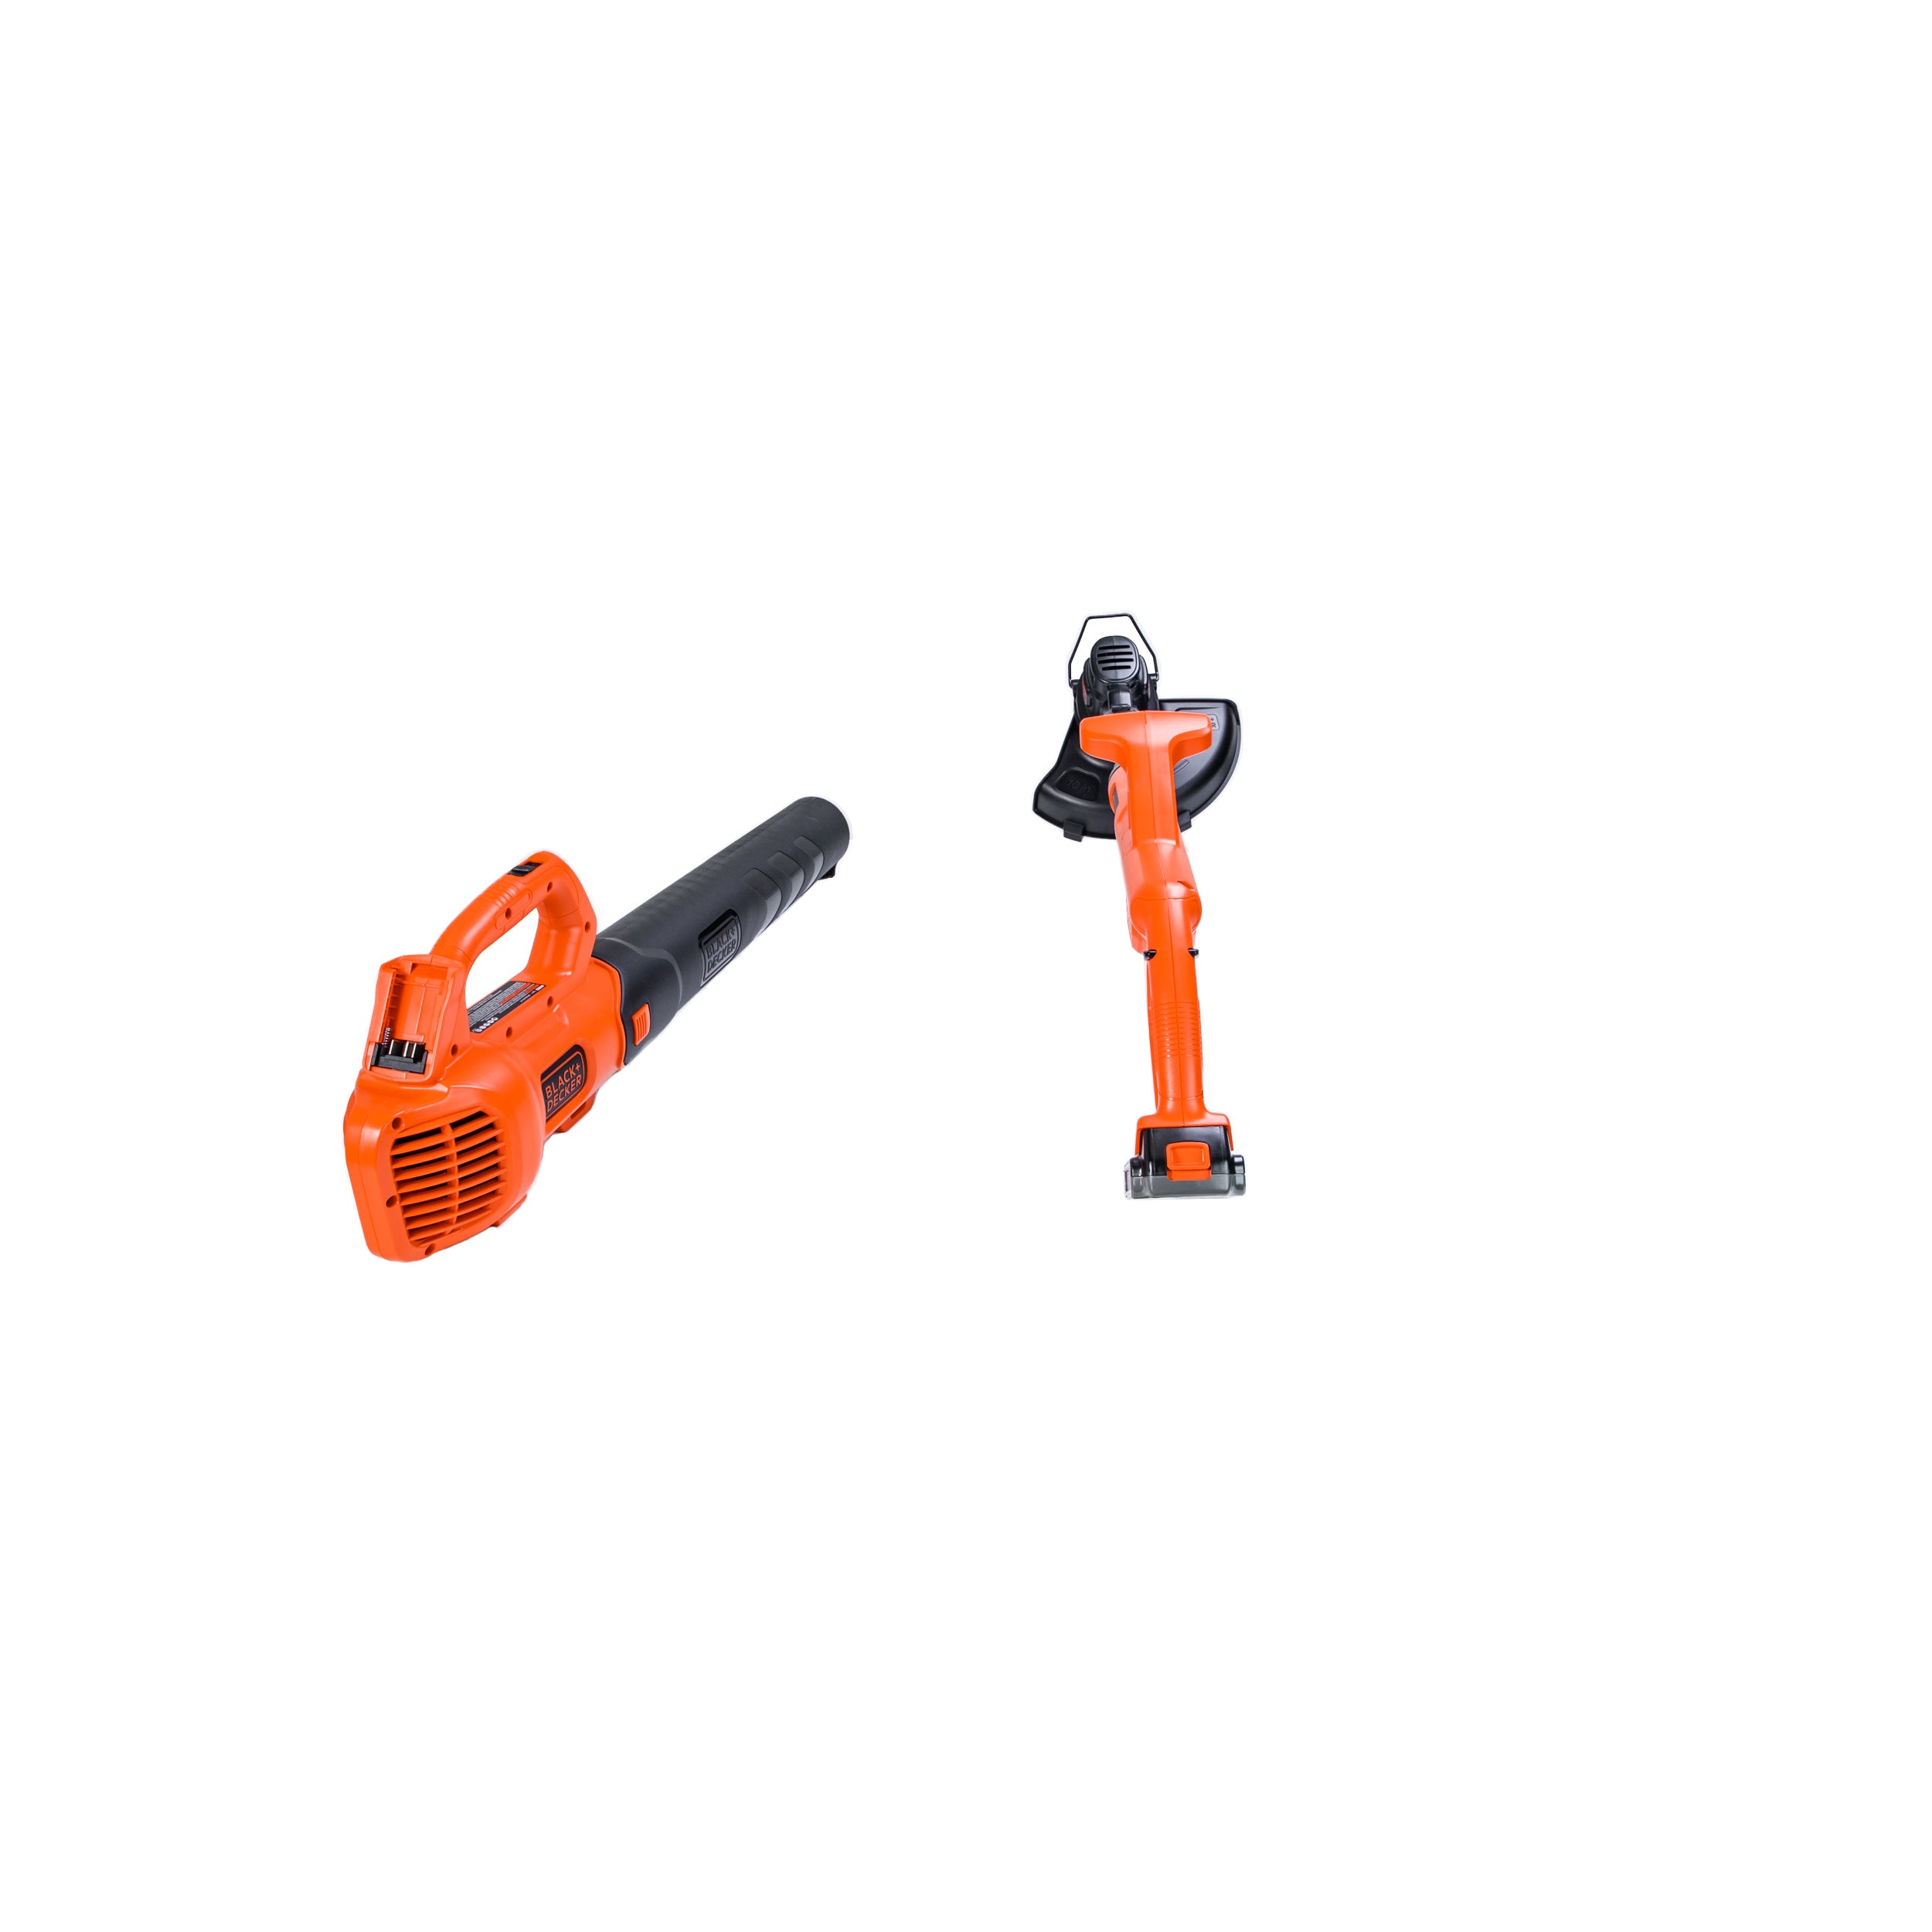 BLACK+DECKER 20V Powerconnect Axial Leaf Blower & String Trimmer Combo Kit